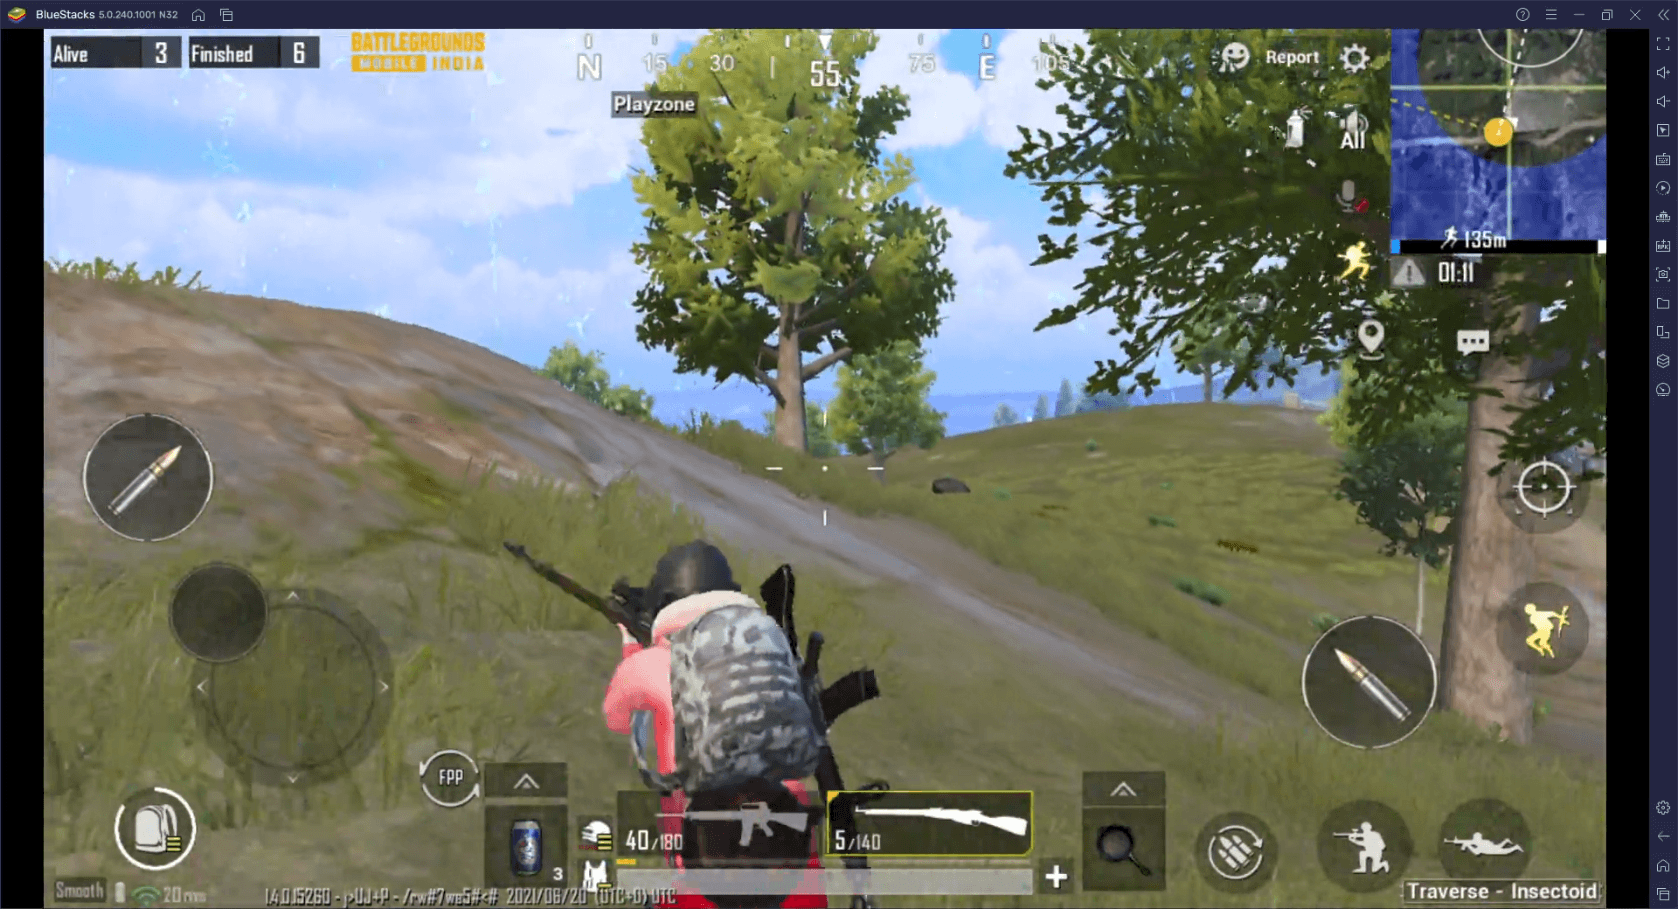 Battlegrounds Mobile India - The Best BGMI Tips and Tricks For Winning Endless Chicken Dinners